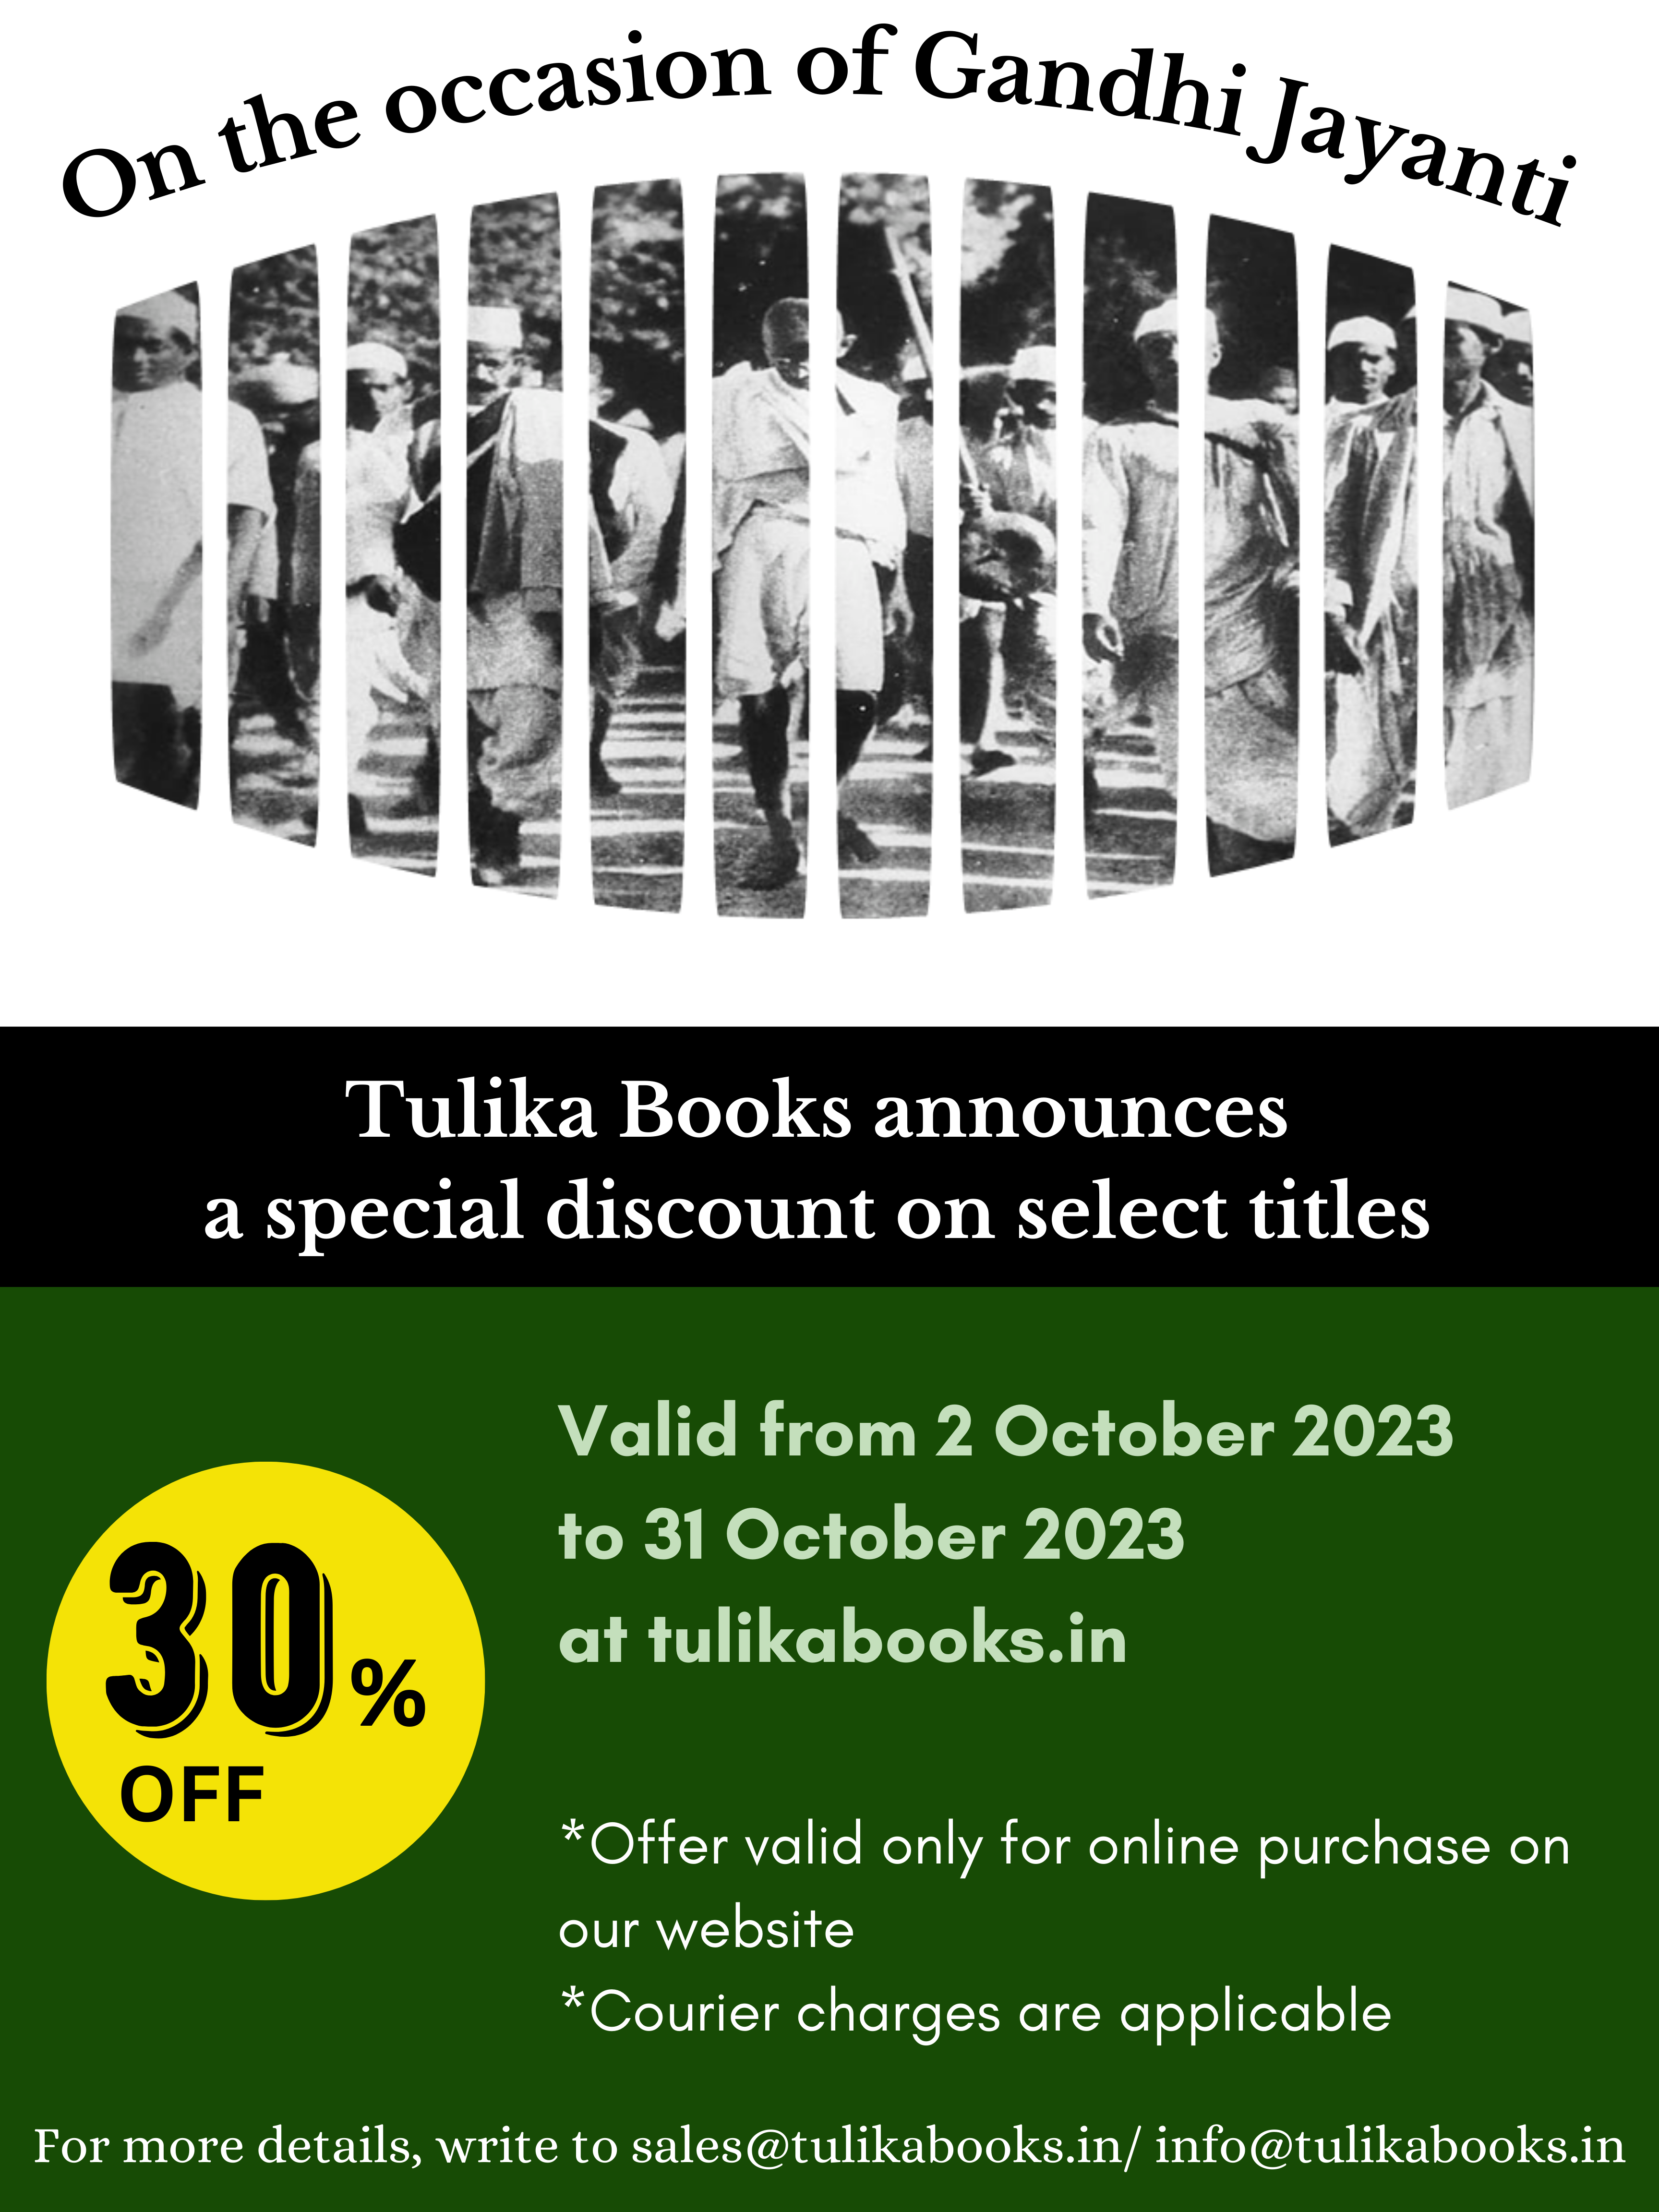 Special price offer at tulikabooks.in, on select titles, 2 to 31 October 2023